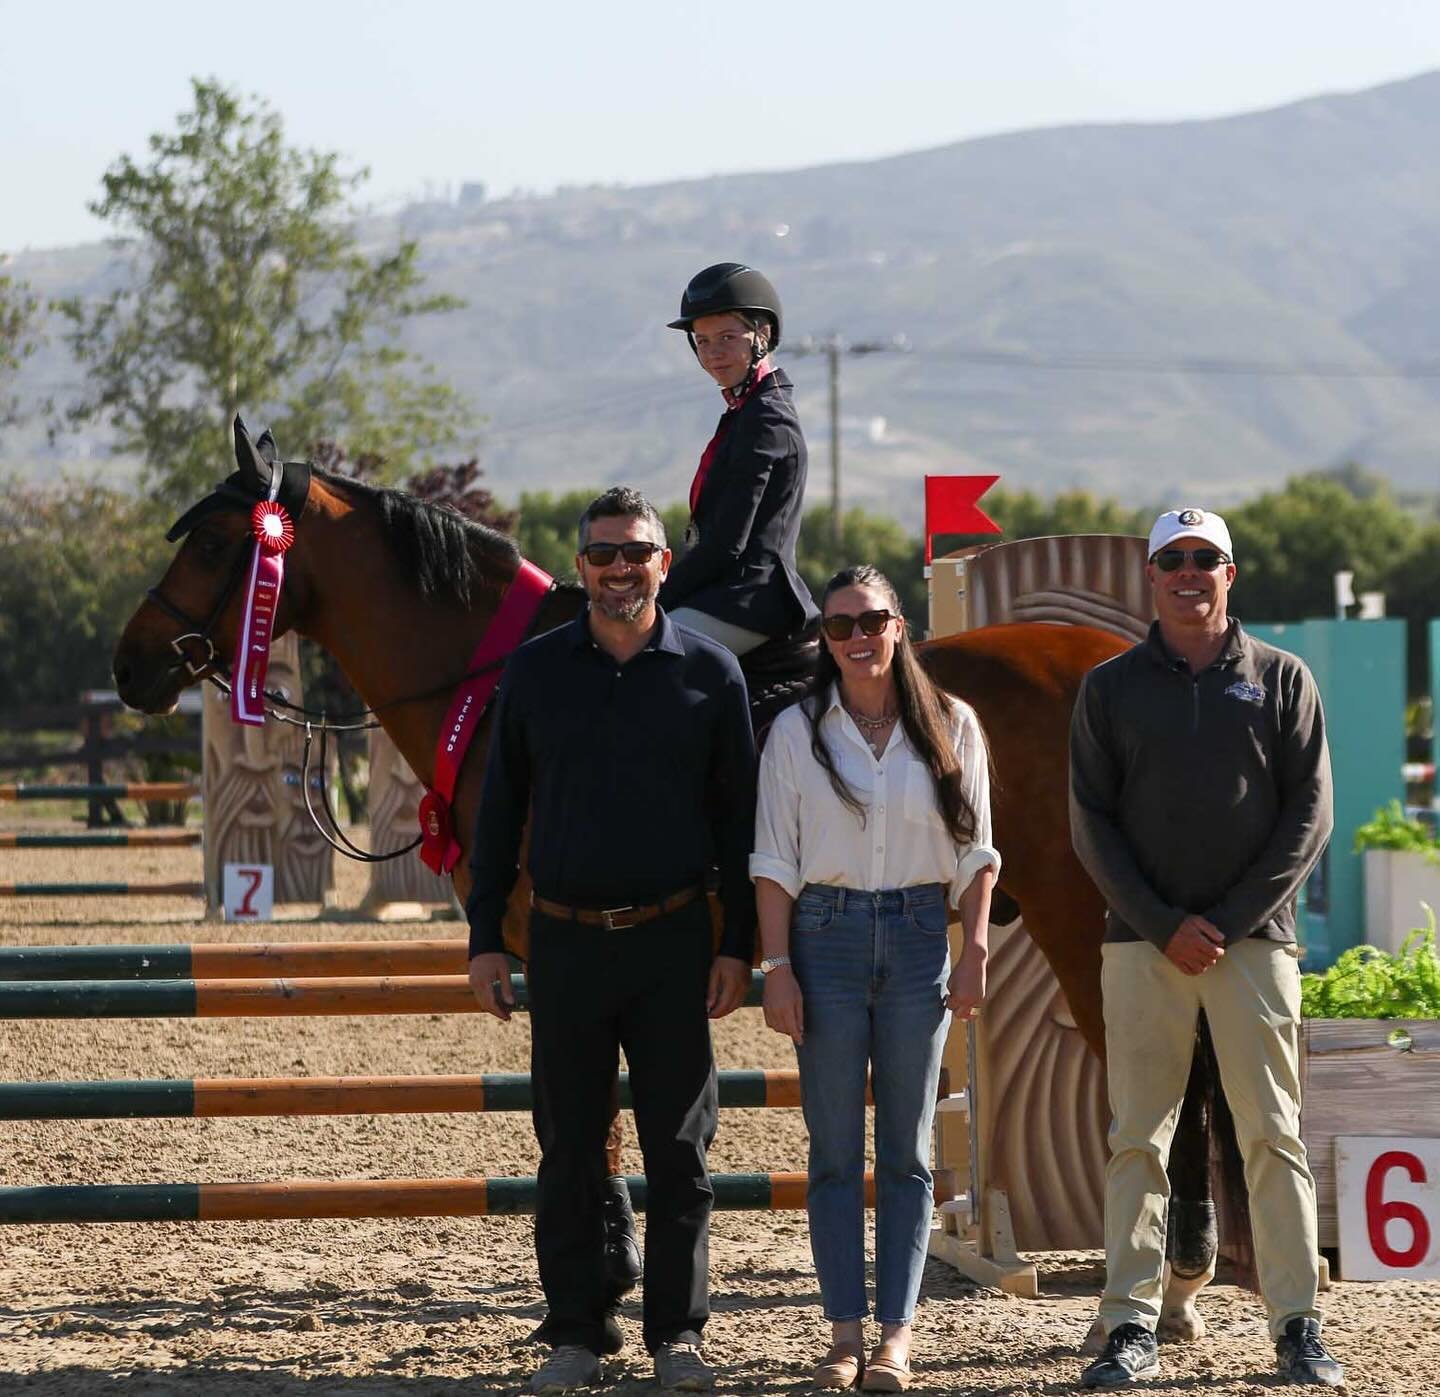 Congratulations to Lindsay Green on a great week at Temecula Valley National Premier 1!🥳🏆

🌟Counting Stars was Champion in the .90 Jumpers with Rebecca and 2nd in the .75 Jumper Classic with Lindsay
🌟MCL Sparkle was Champion .70 Jumpers with Lind